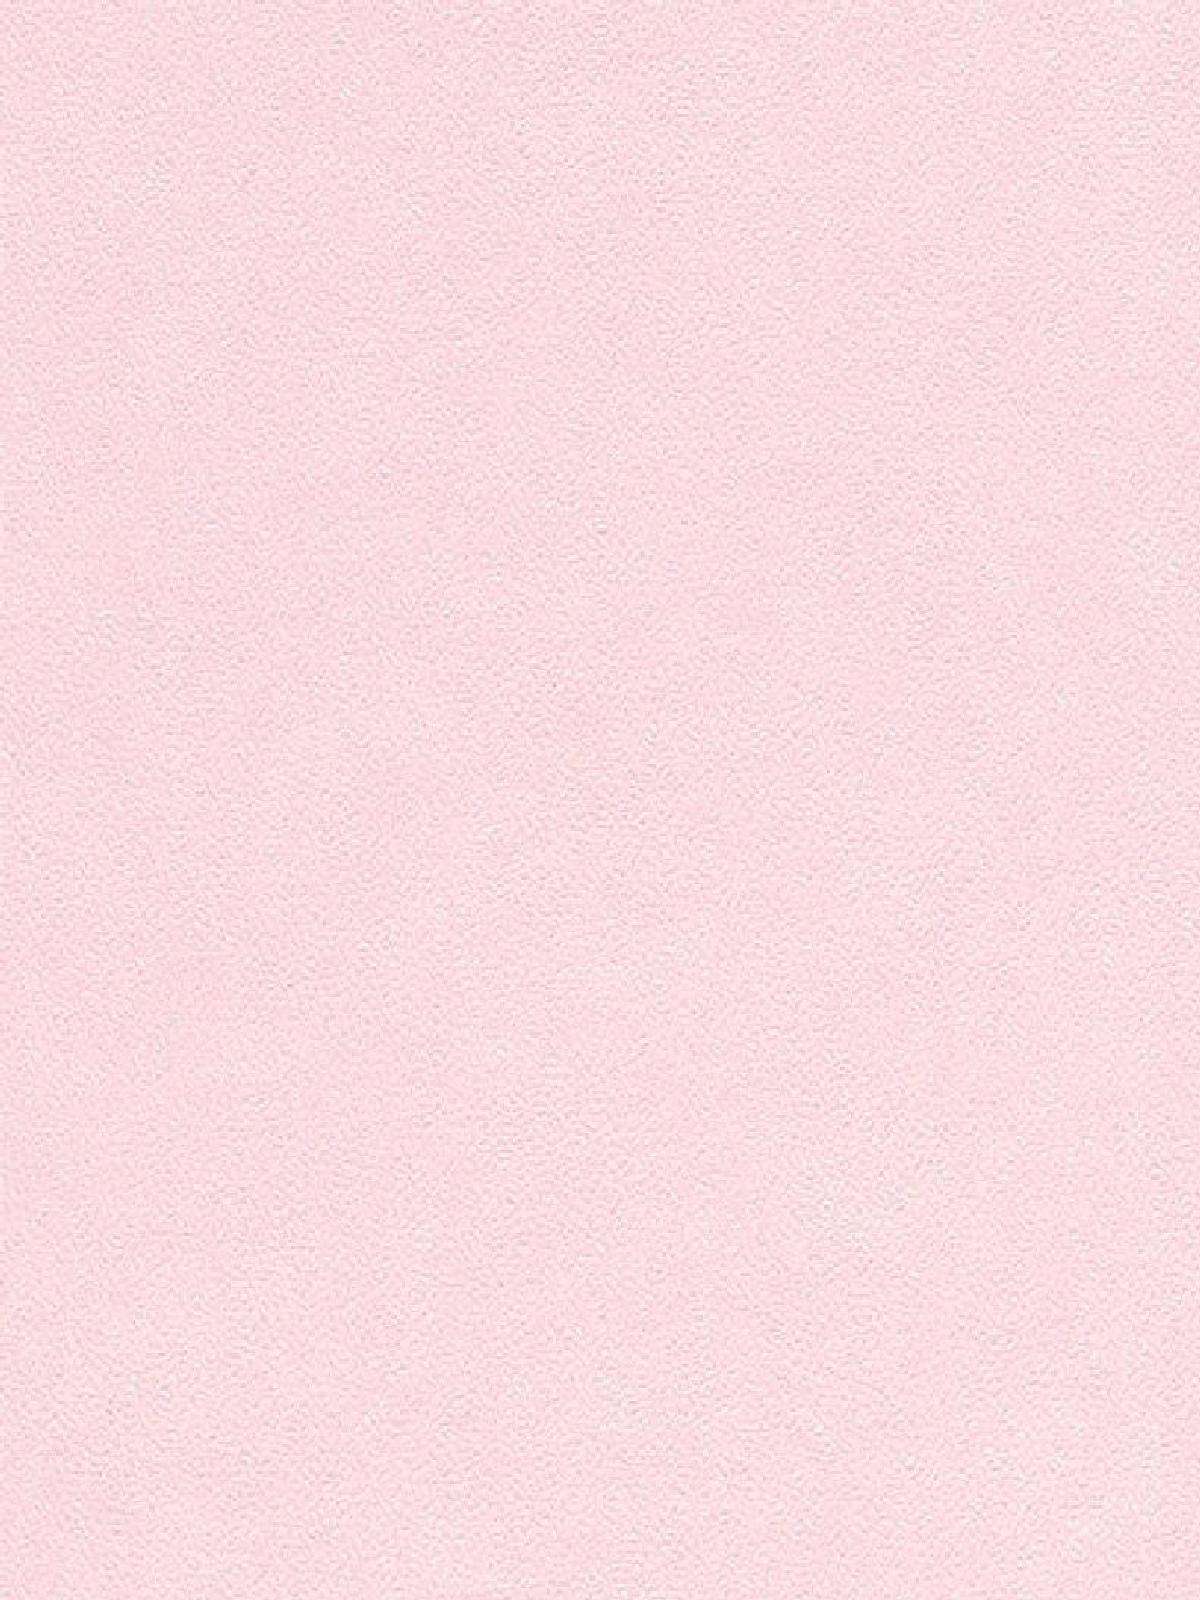 Soft Pink Wallpapers - Wallpaper Cave